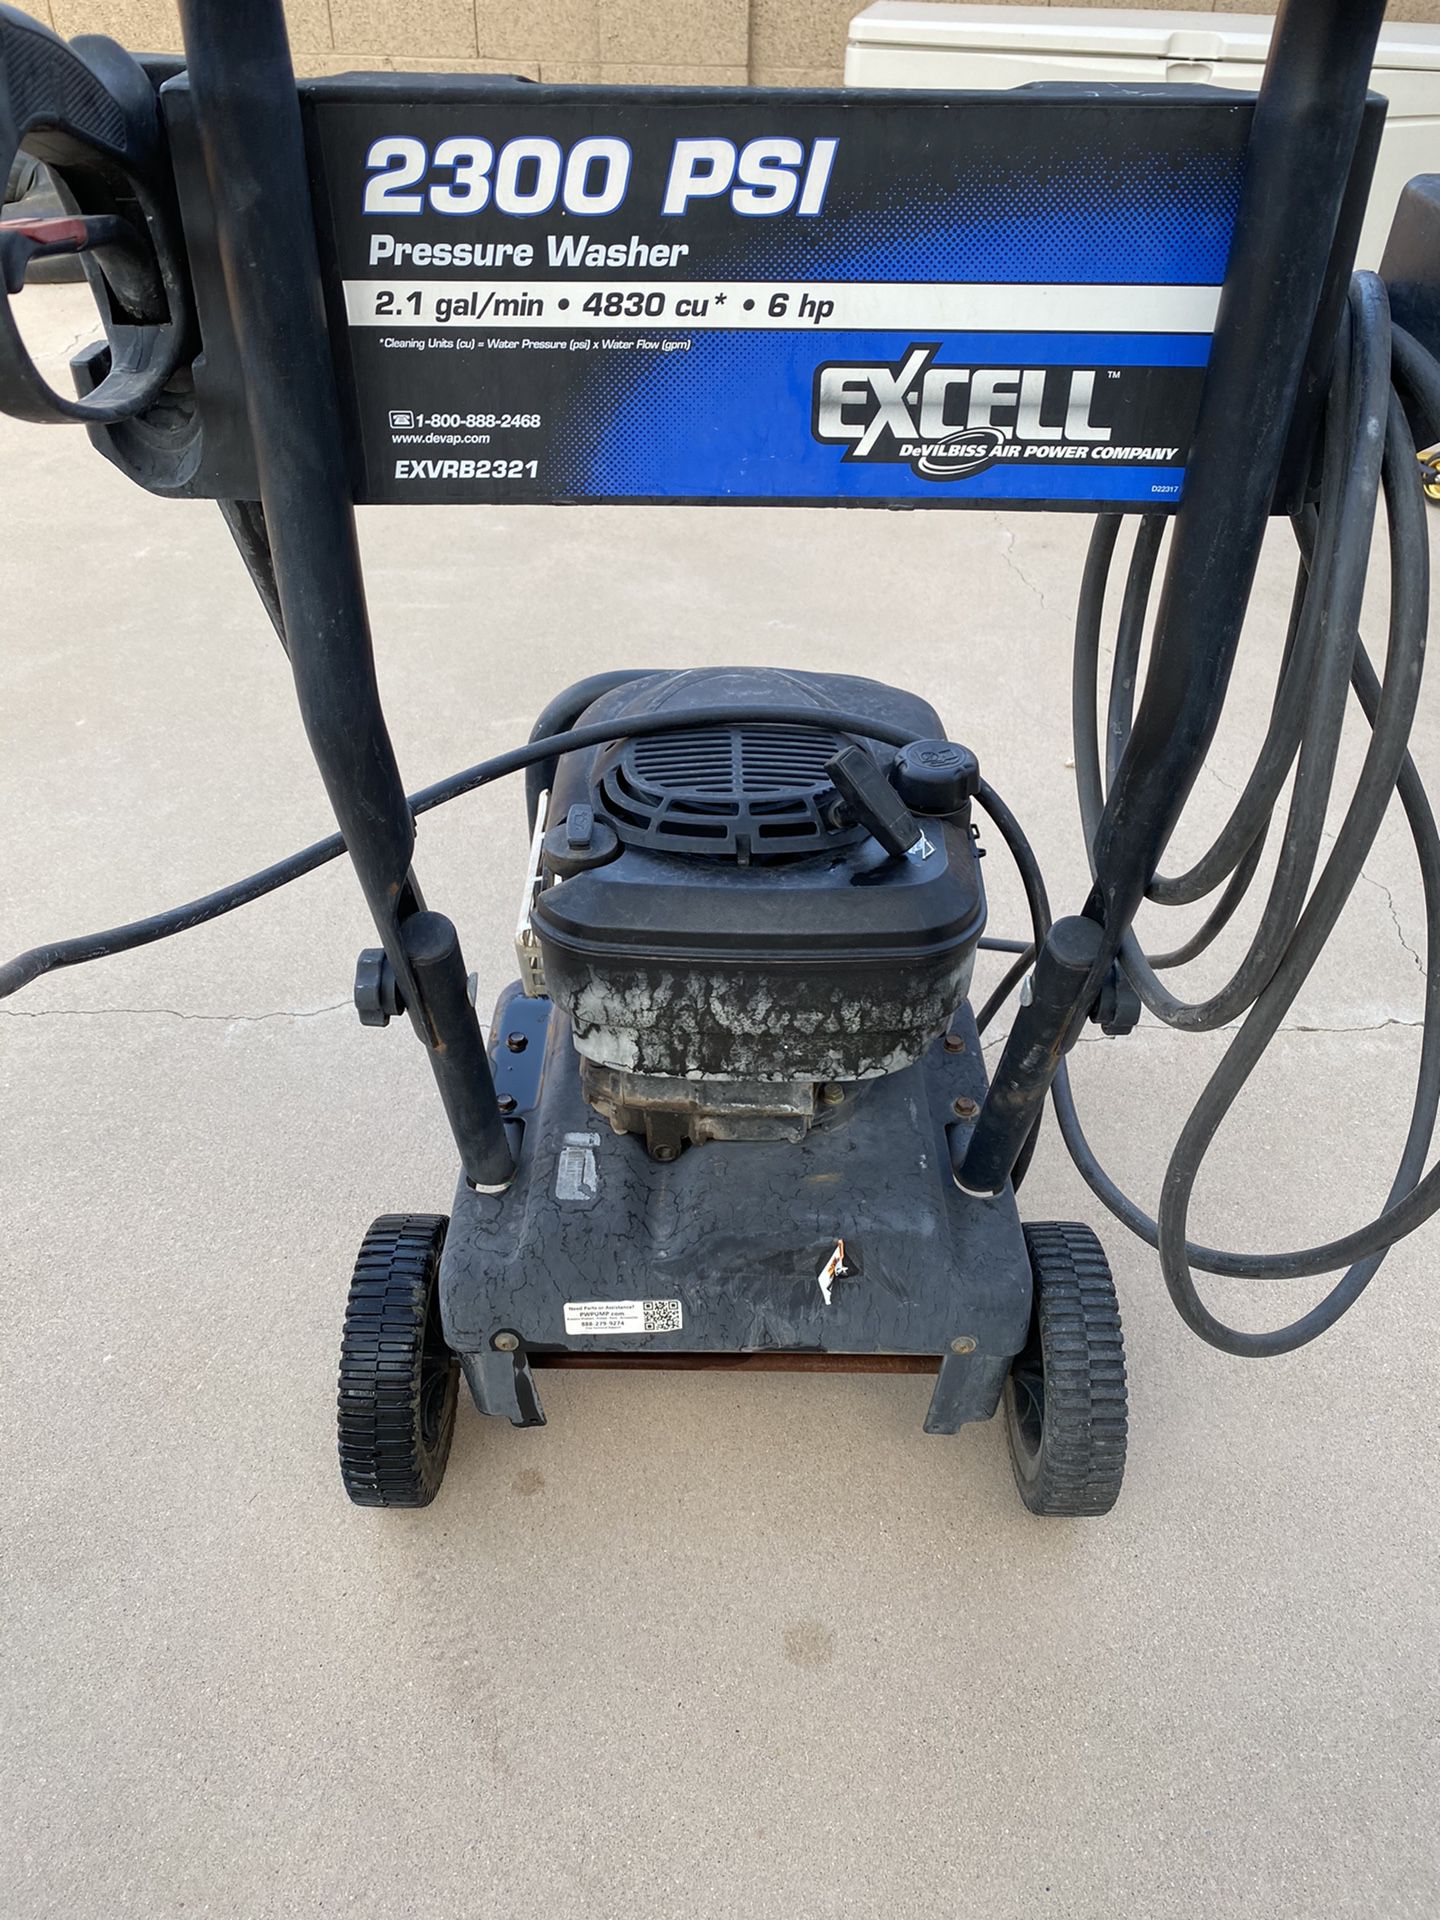 Psi Gas Pressure Washer Excell Please Read For Sale In Phoenix Az